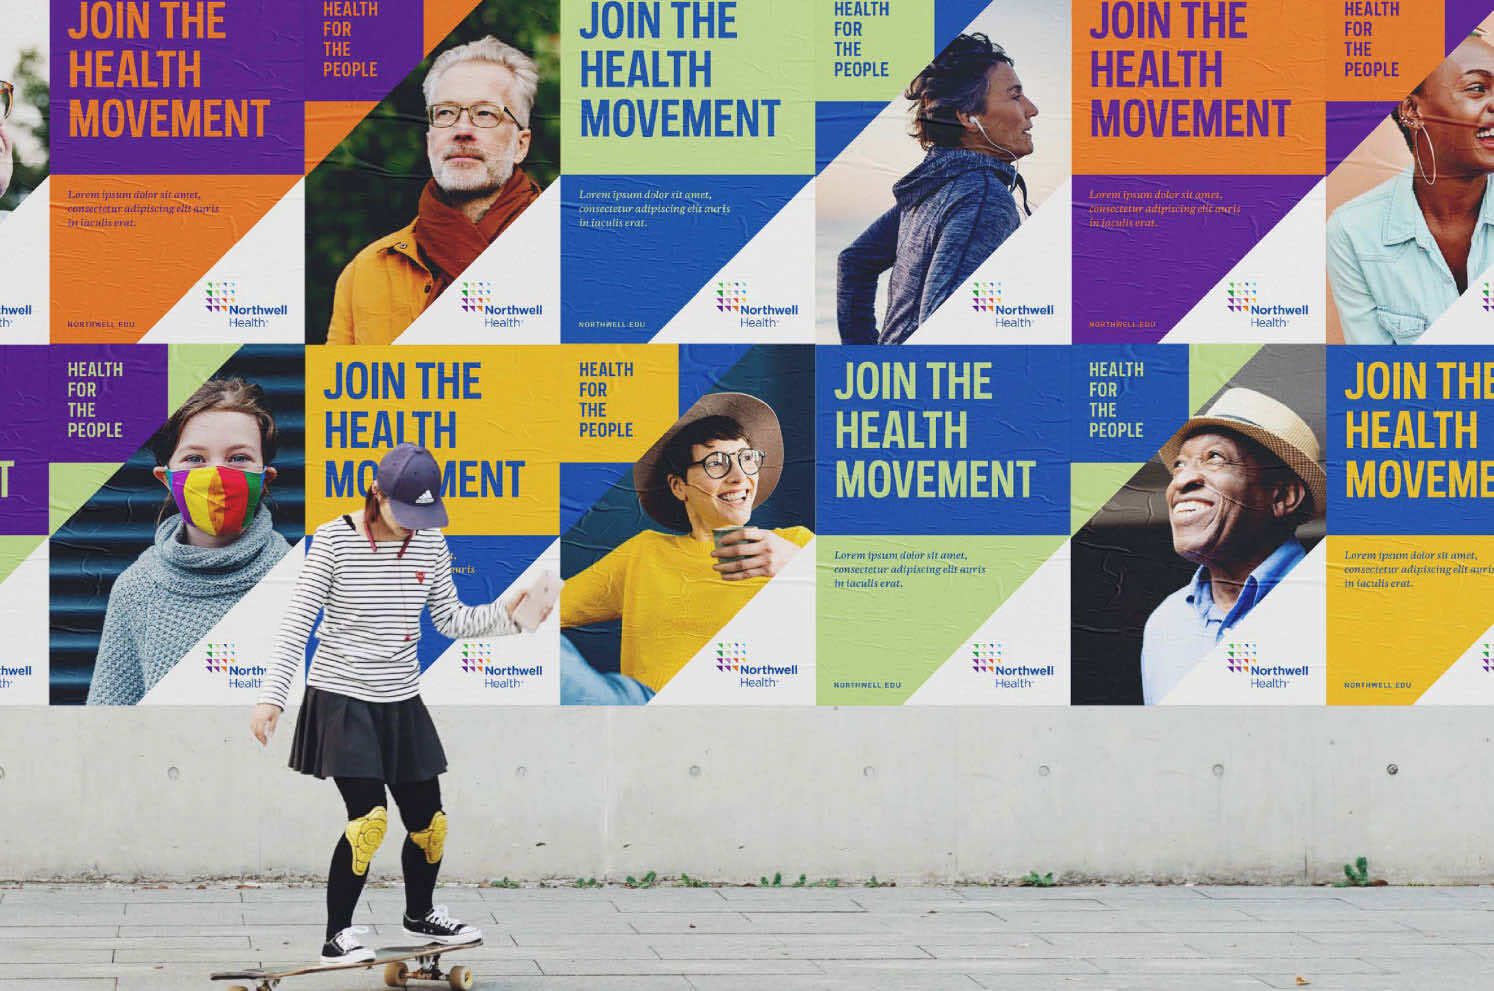 Northwell - Poster wall behind girl on a skateboard